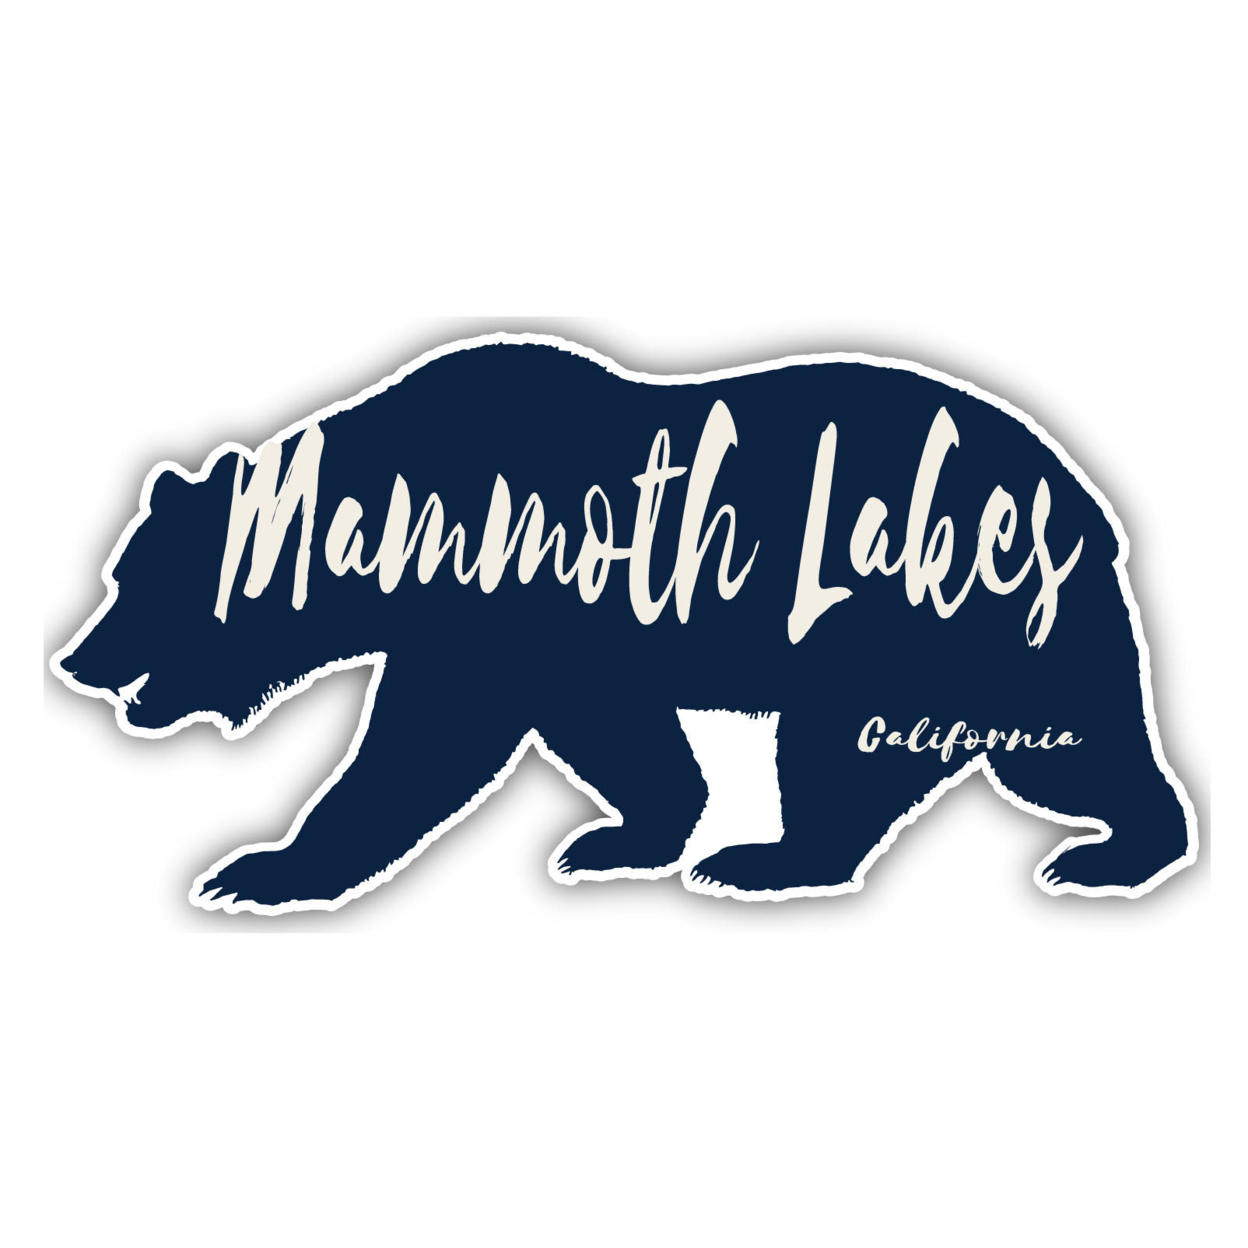 Mammoth Lakes California Souvenir Decorative Stickers (Choose Theme And Size) - 2-Inch, Bear